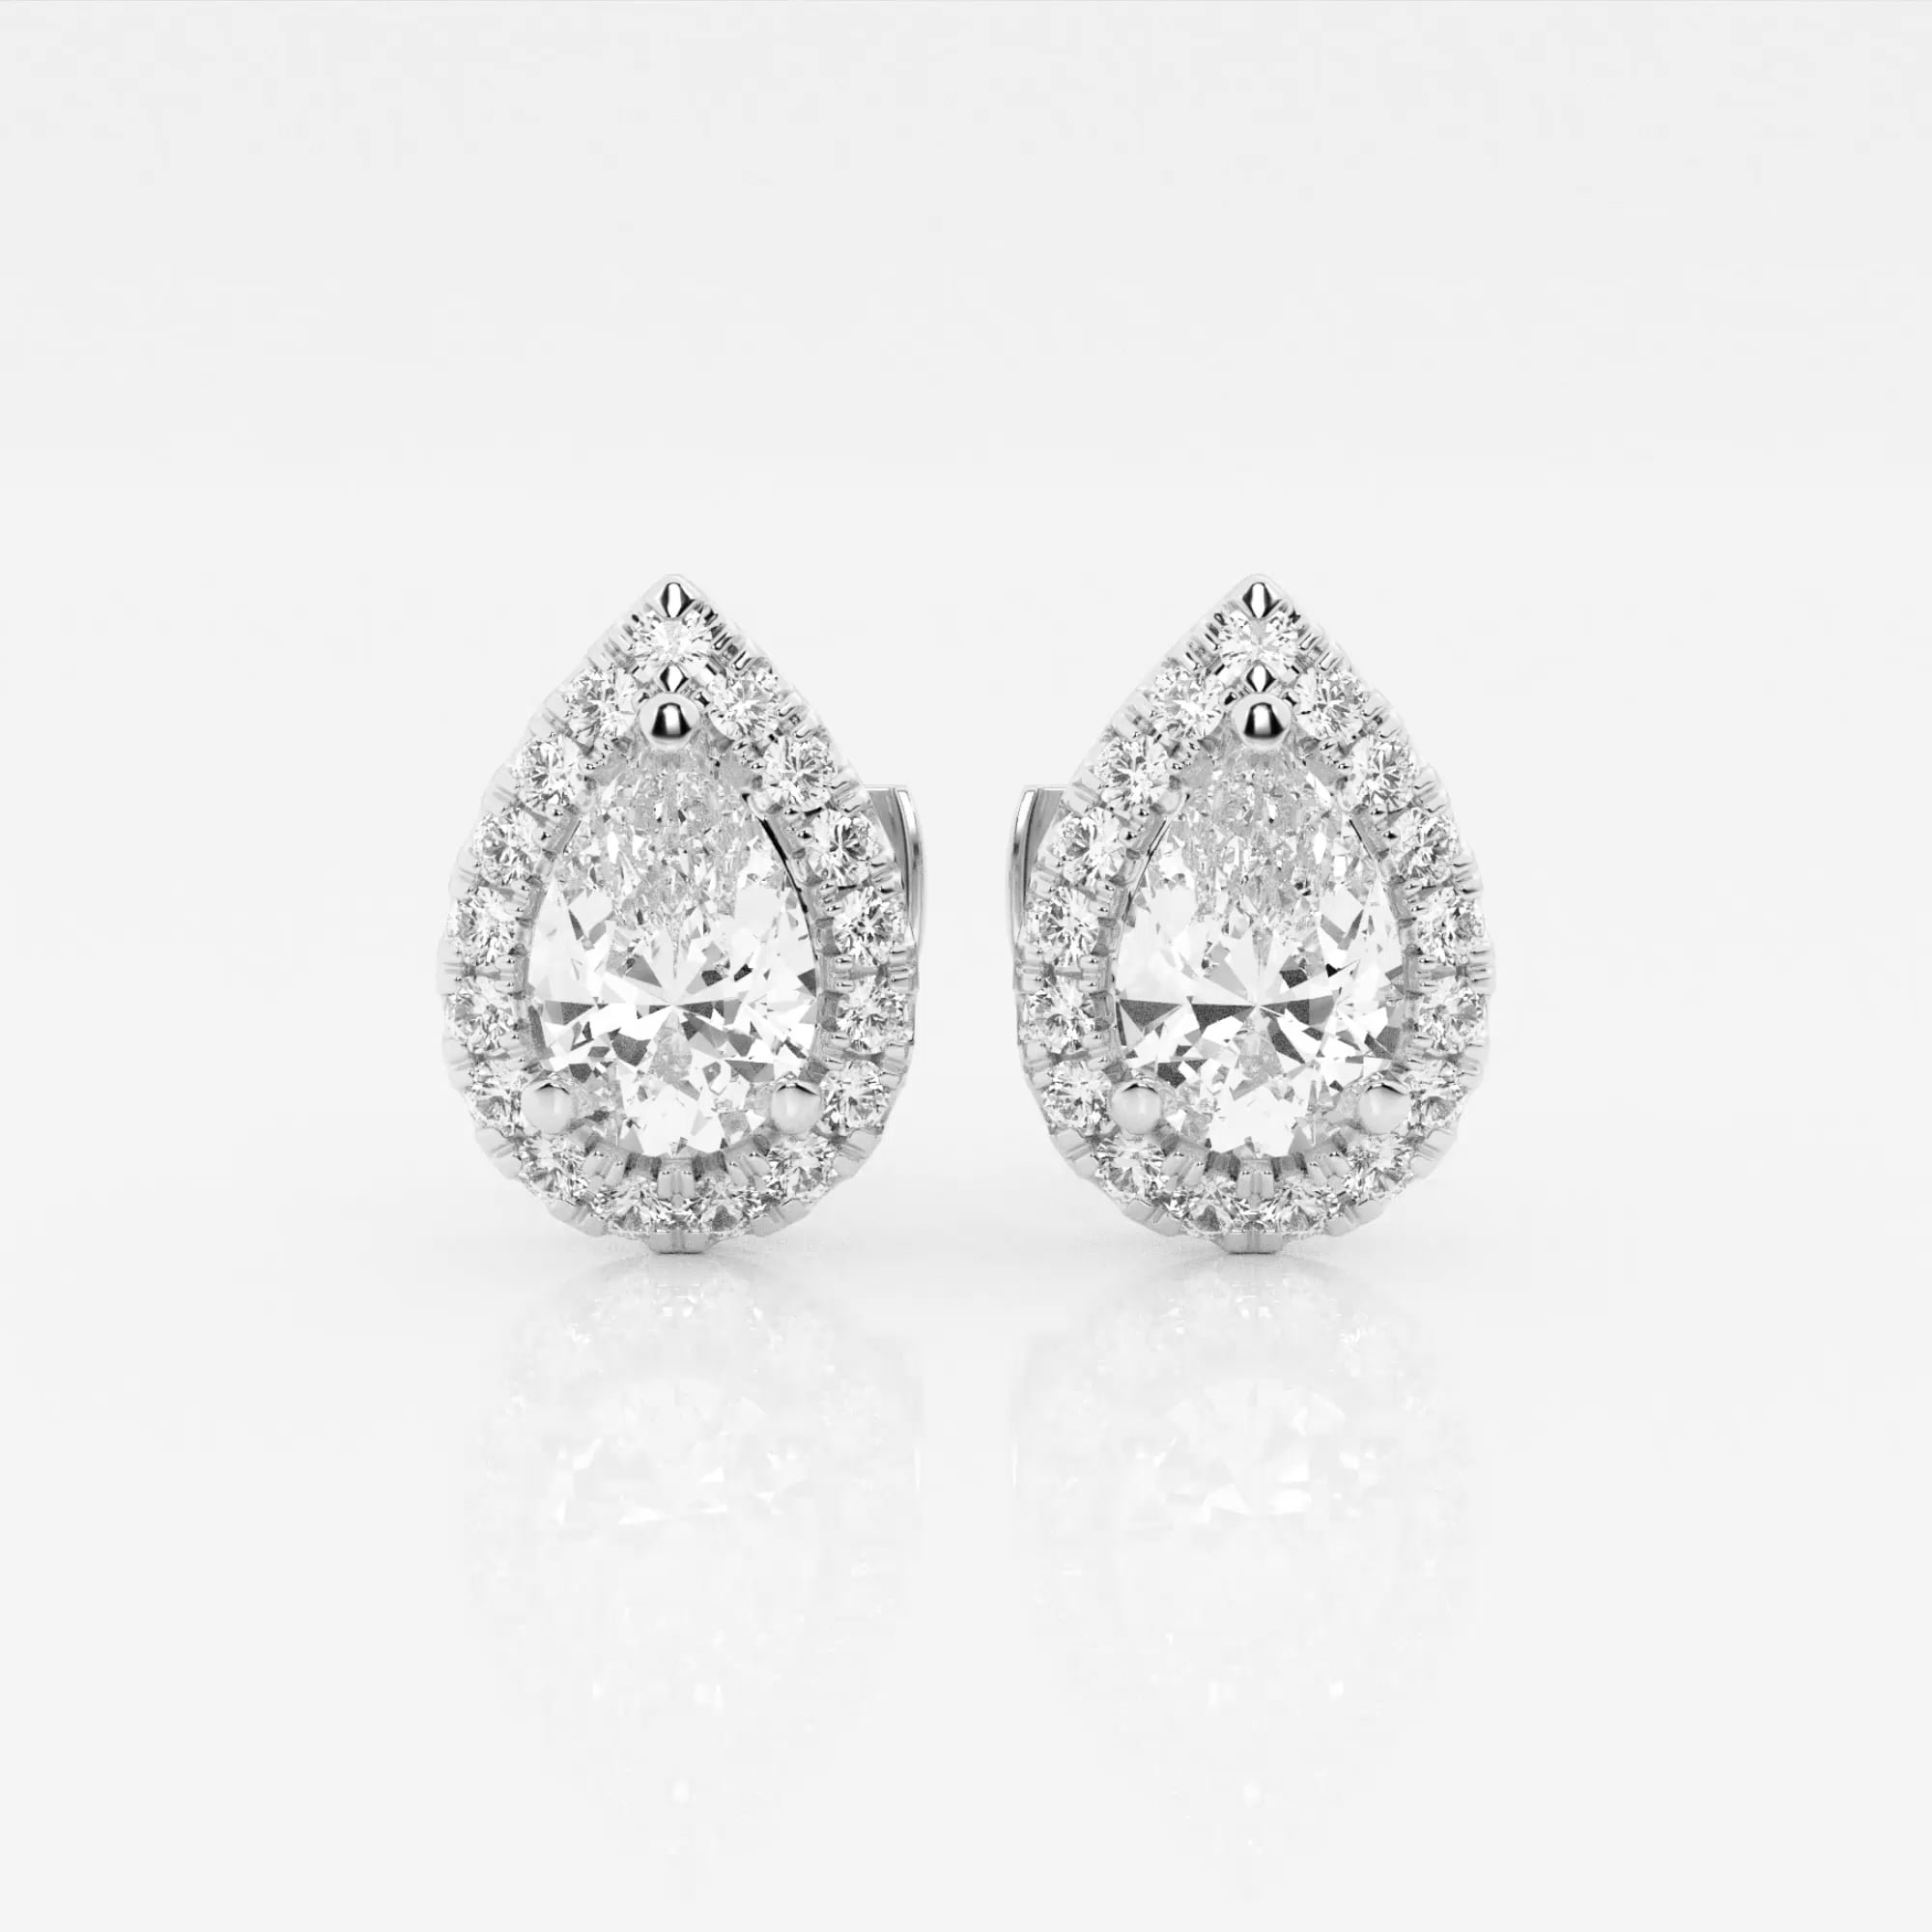 product video for 1 7/8 ctw Pear Lab Grown Diamond Halo Certified Stud Earrings